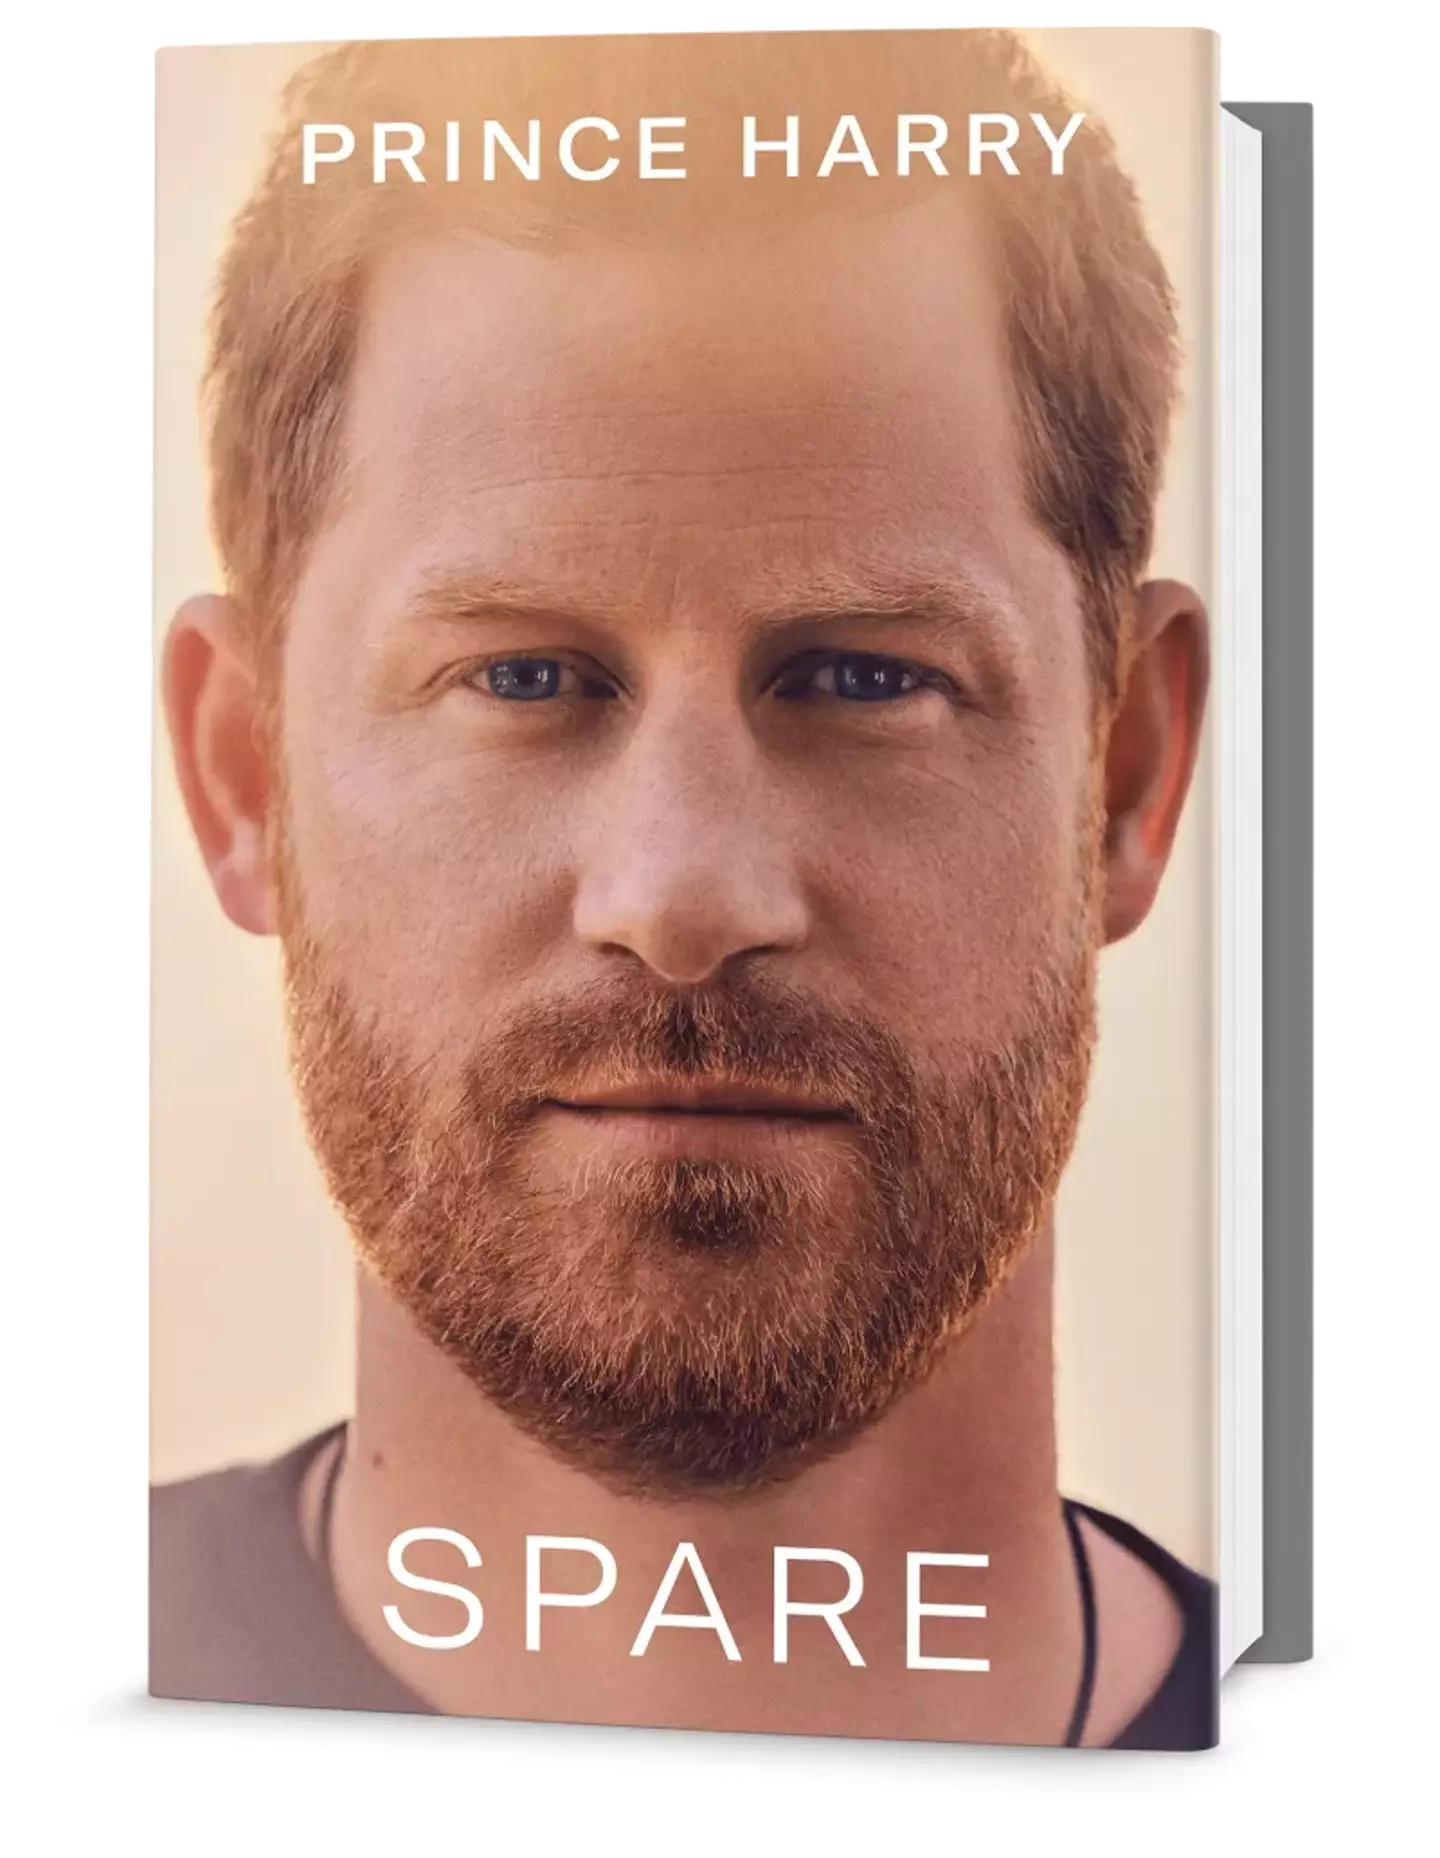 The book title seems to reference the saying 'heir and a spare'.